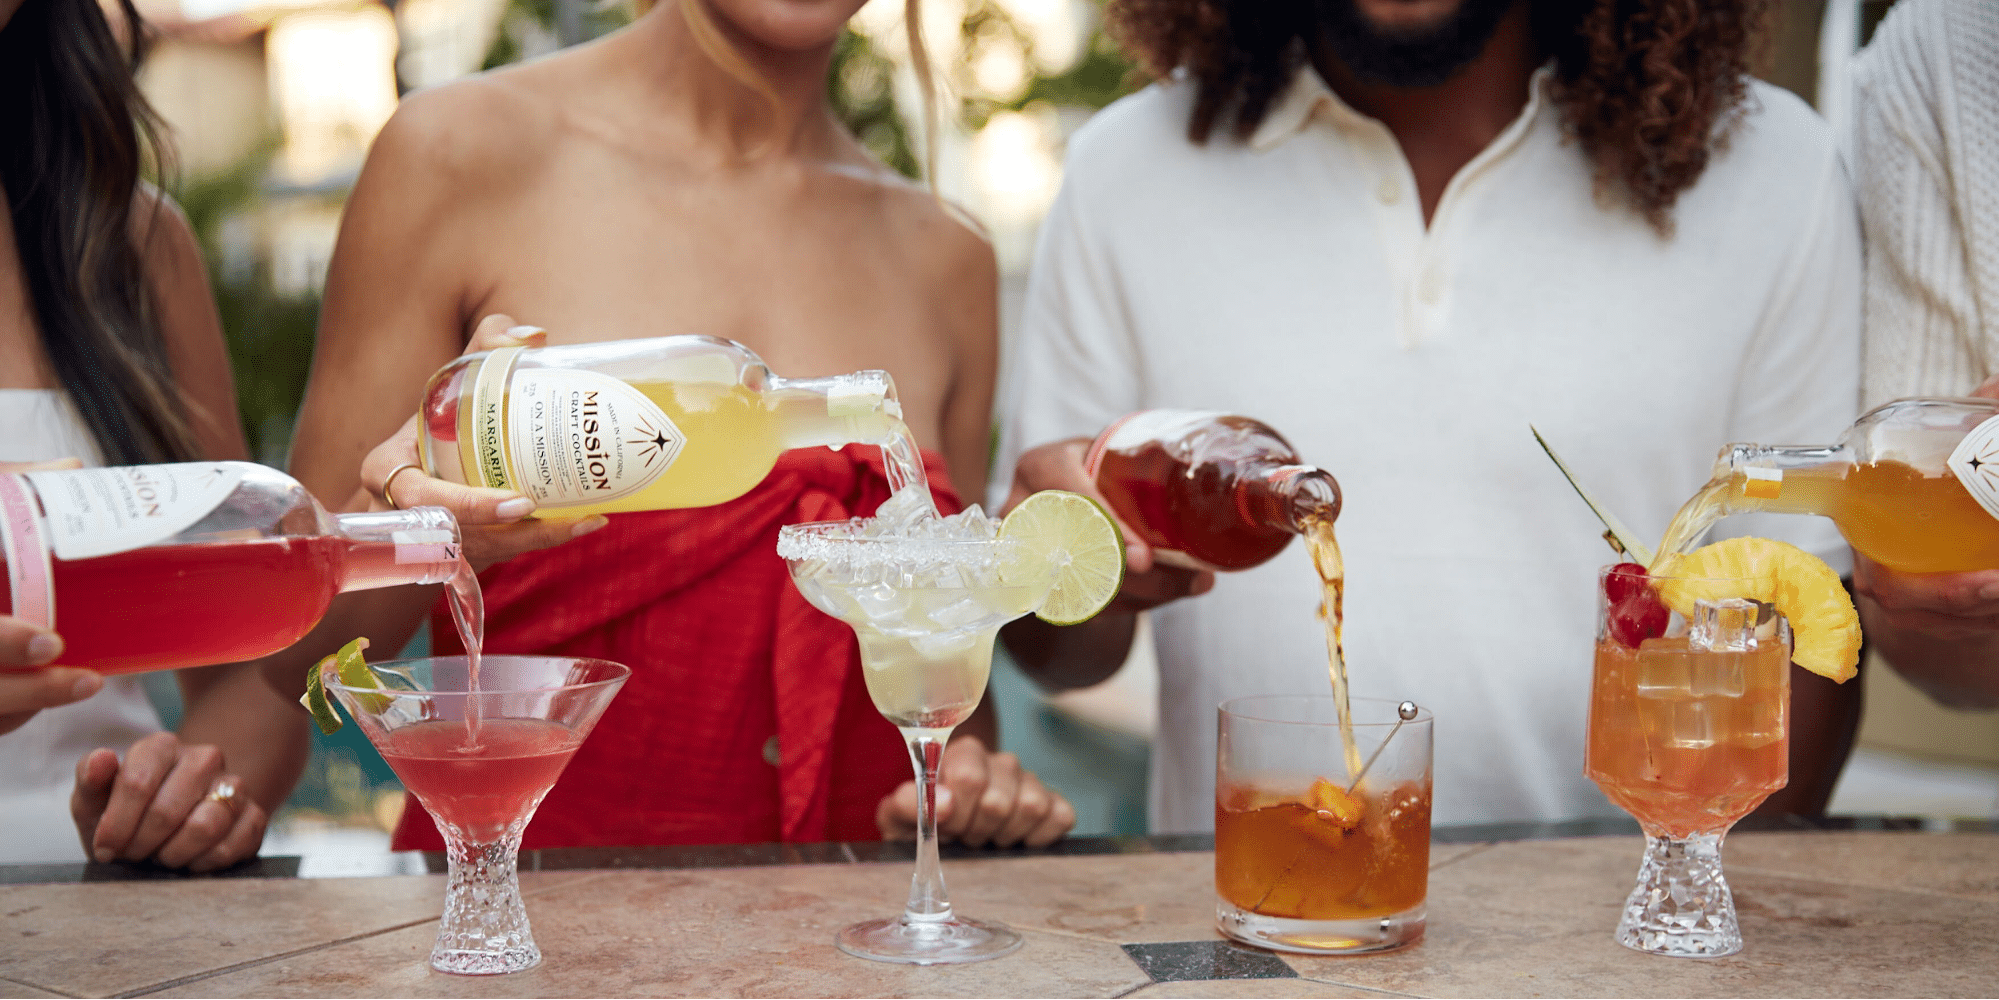 Pouring Purpose: How Mission Cocktails' Philanthropic Model is Changing the Beverage Industry